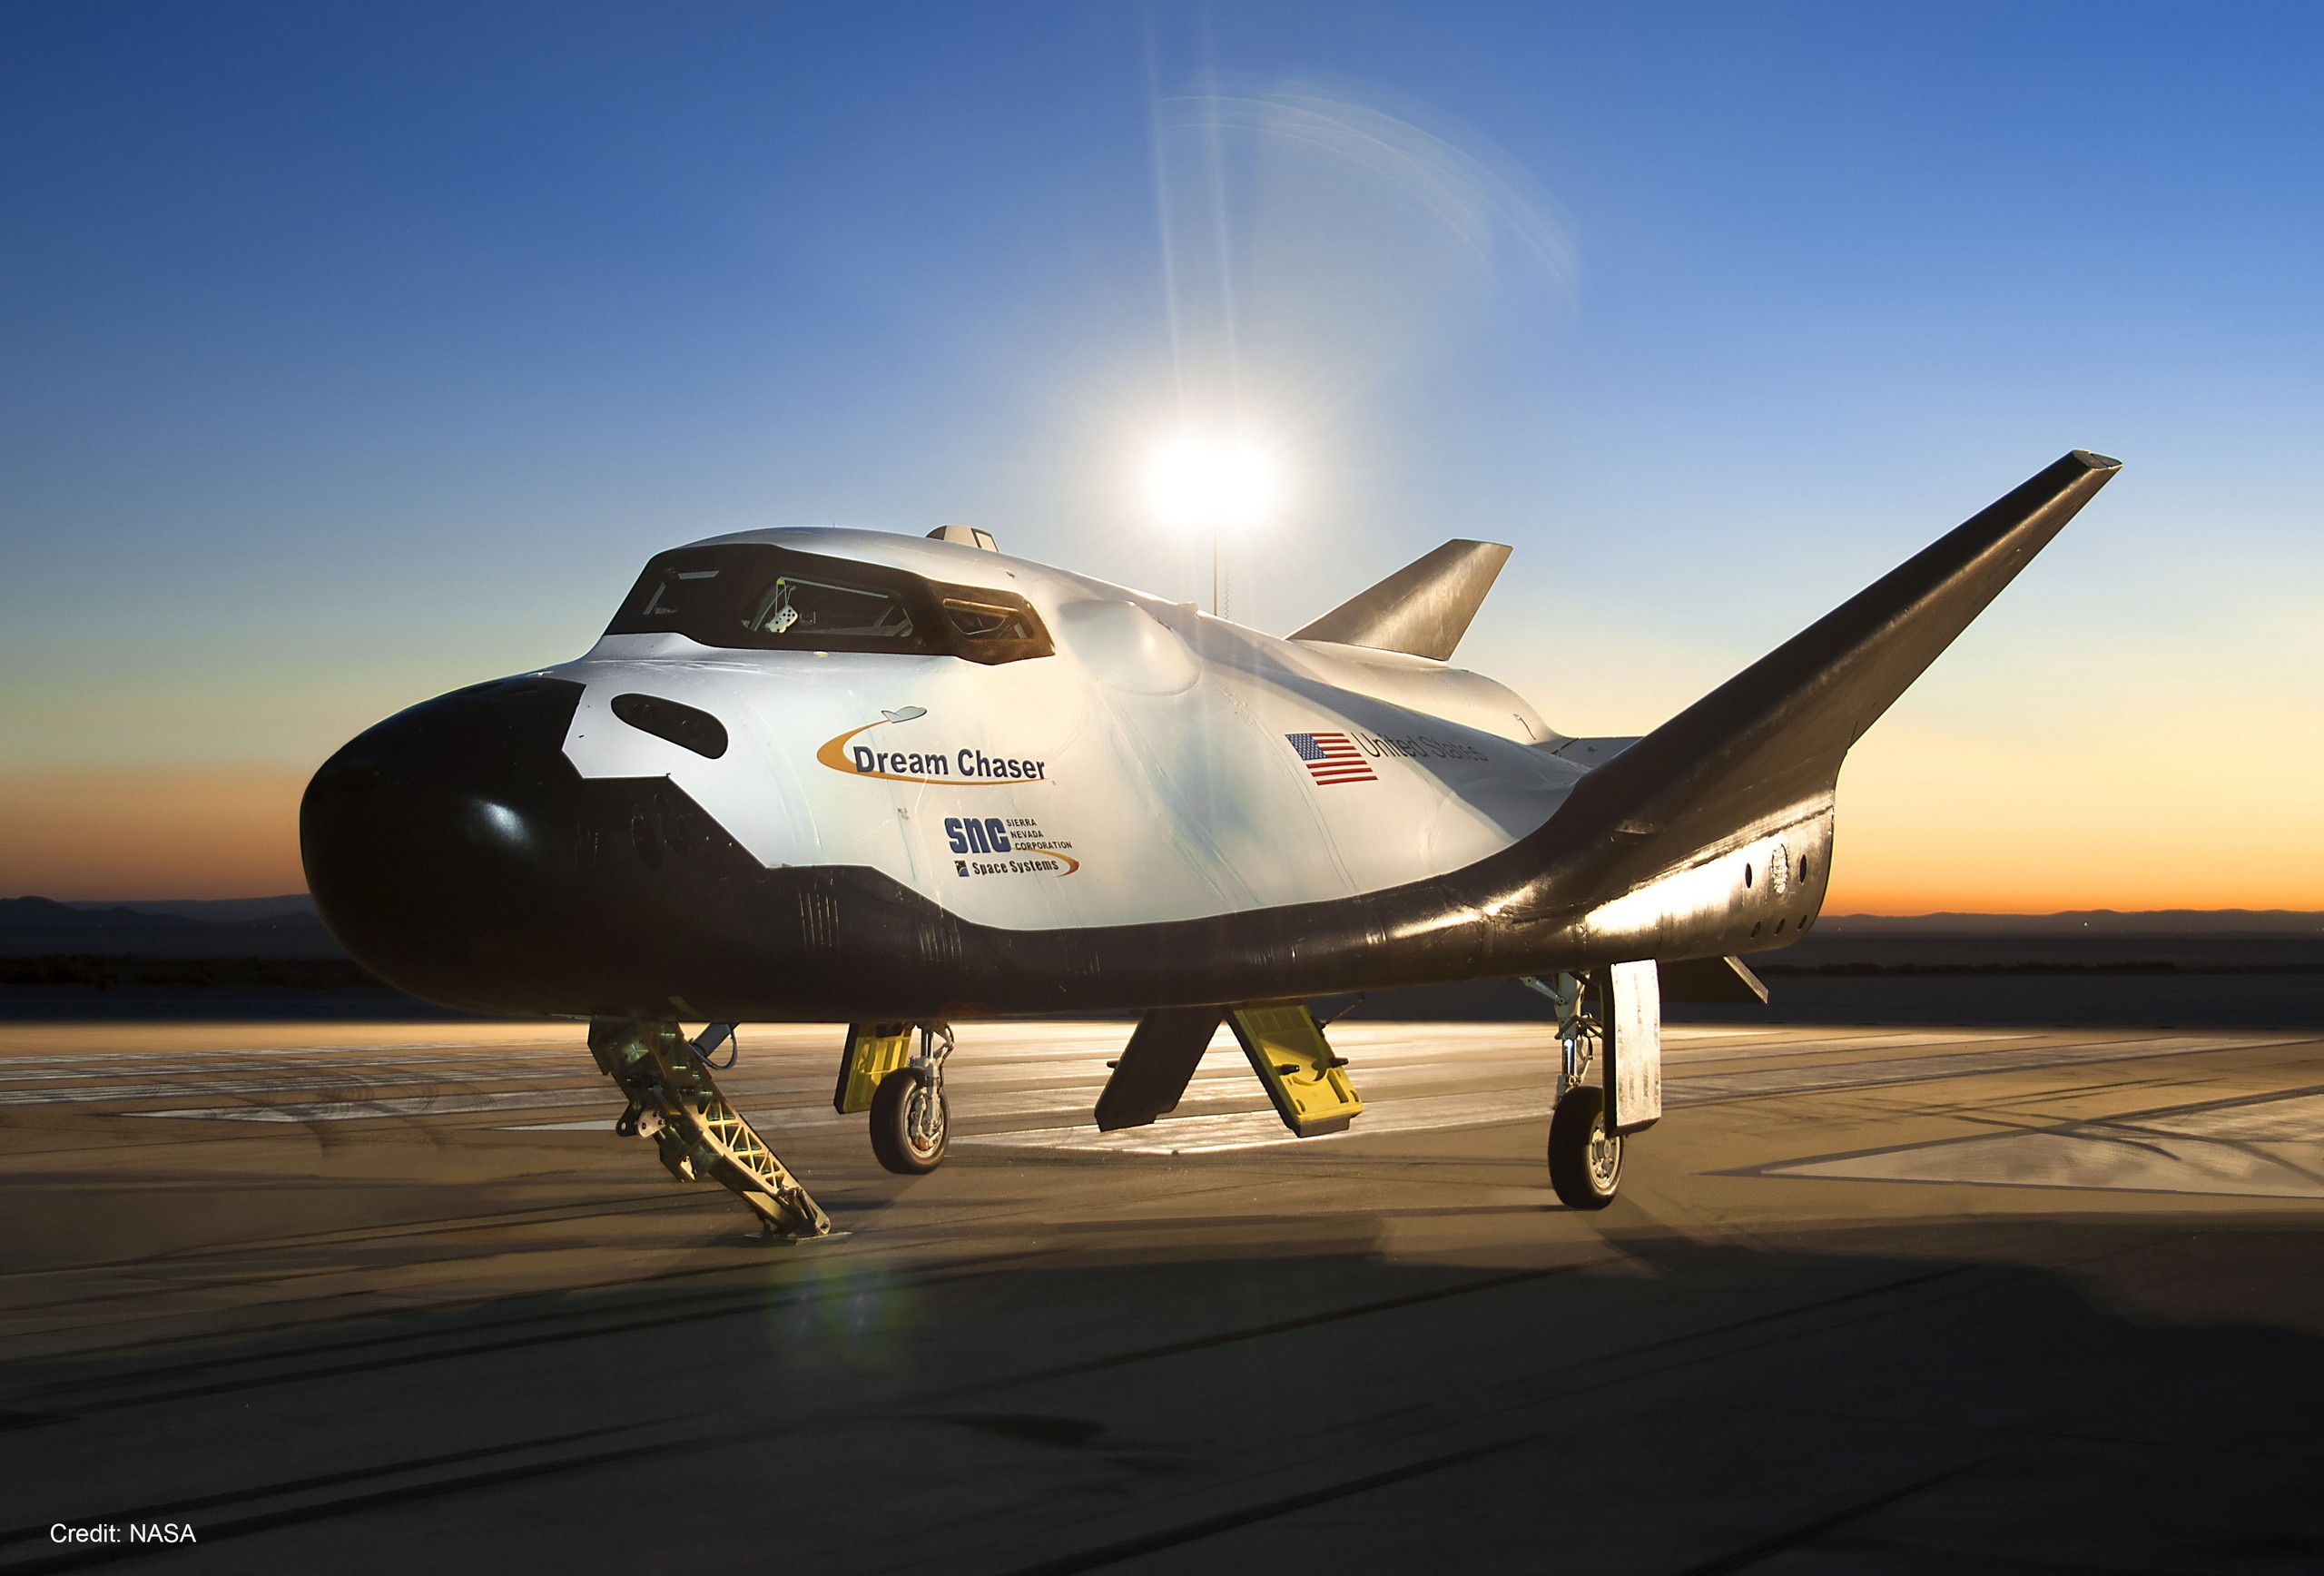 Dream Chaser Spaceplane Gets Ready for Its First Flight to ISS